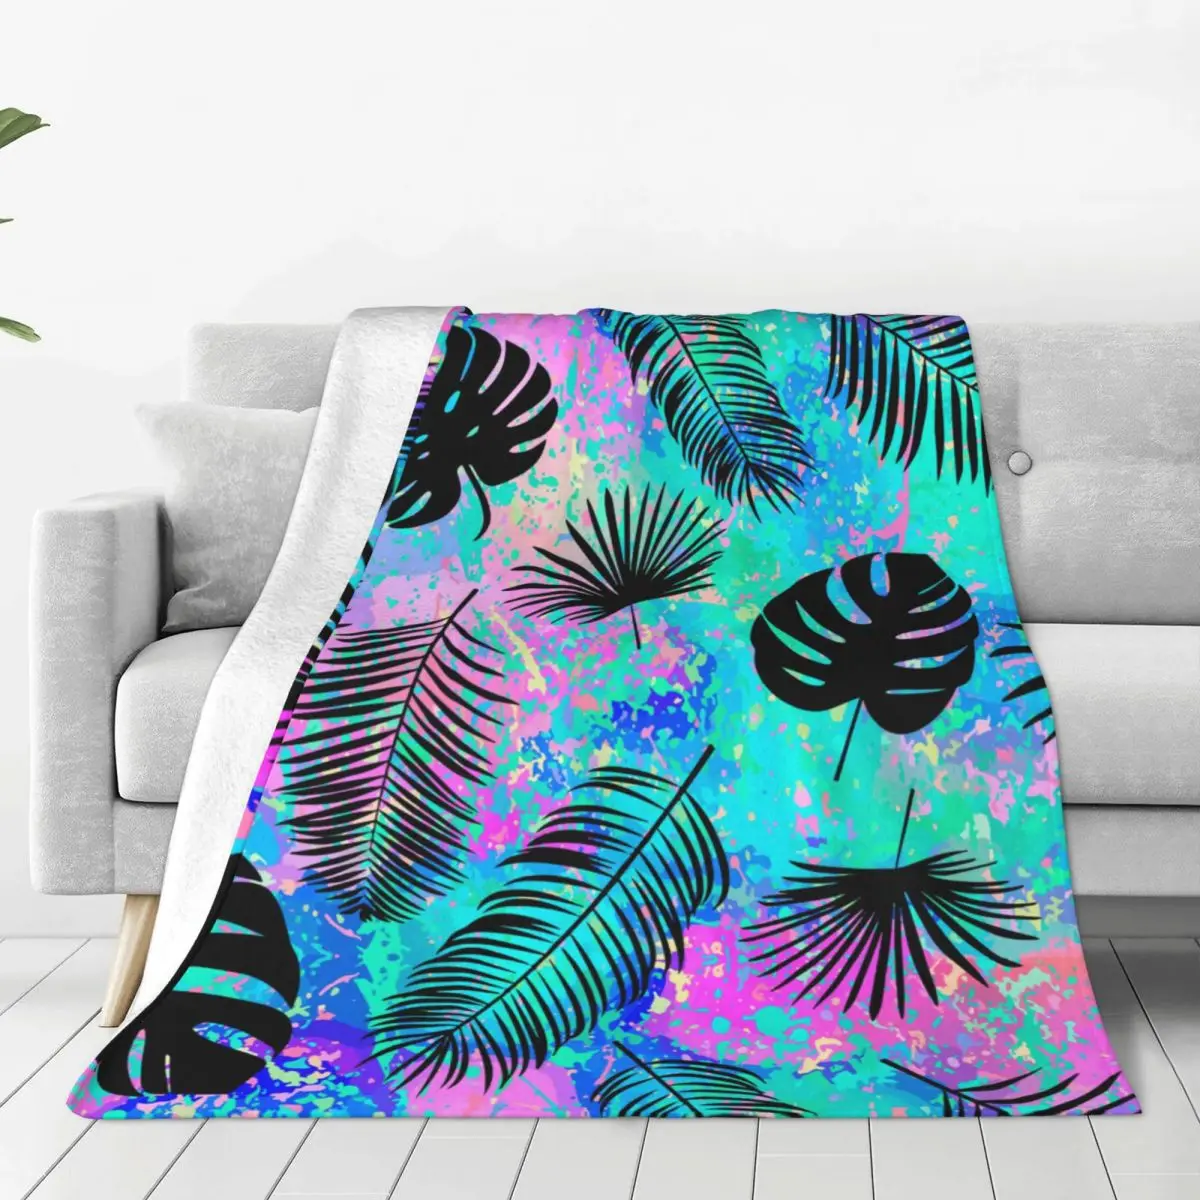 

Palm Silhouette Pattern Soft Fleece Throw Blanket Warm Cozy for All Seasons Comfy Microfiber Blanket for Couch Sofa Bed 40"x30"